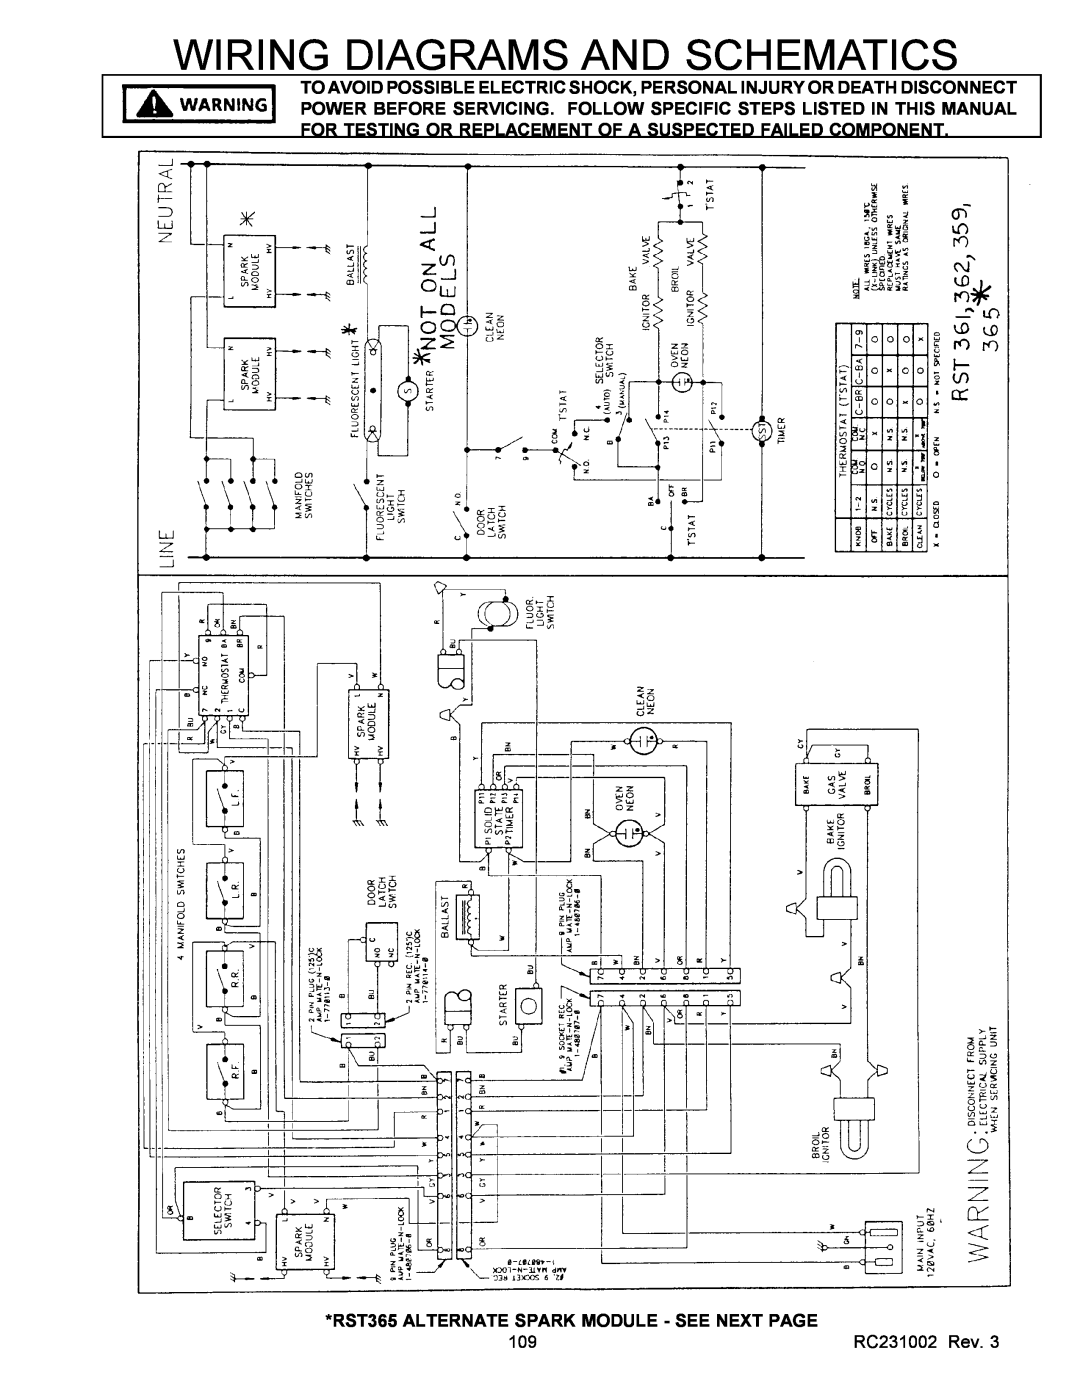 Amana RSS service manual RST365 ALTERNATE SPARK MODULE - SEE NEXT PAGE, Wiring Diagrams And Schematics 